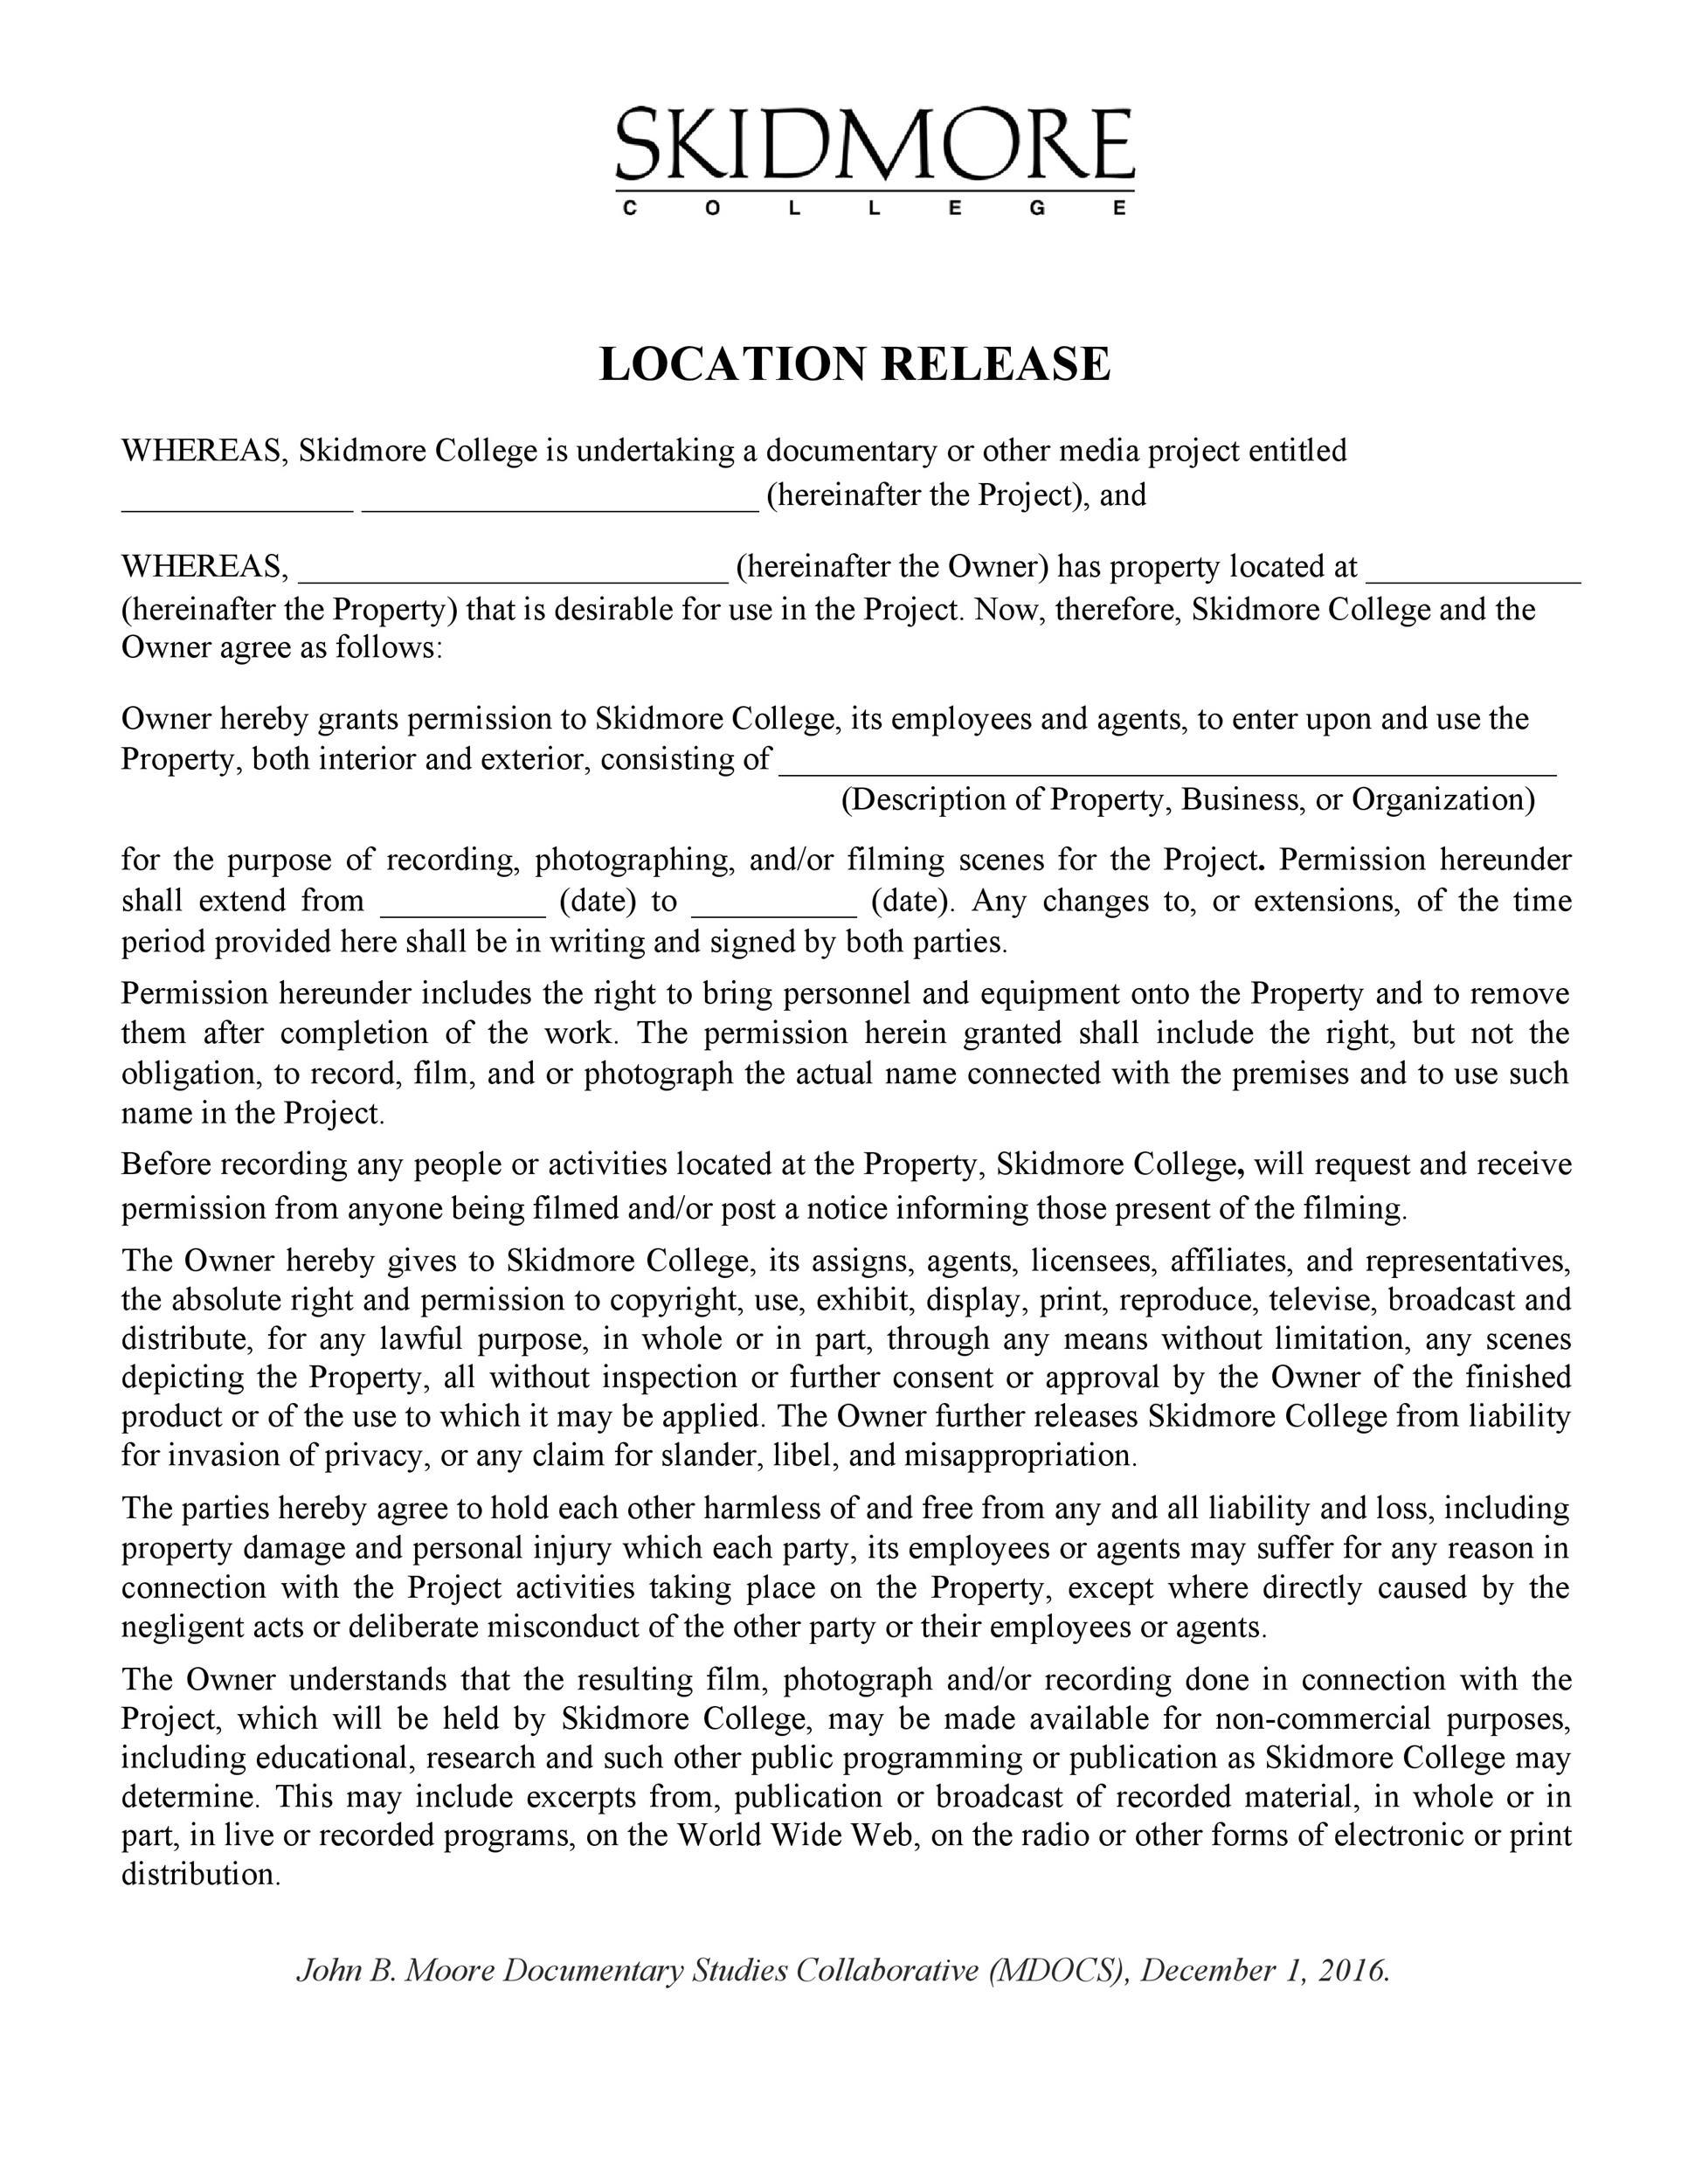 Free location release form 04